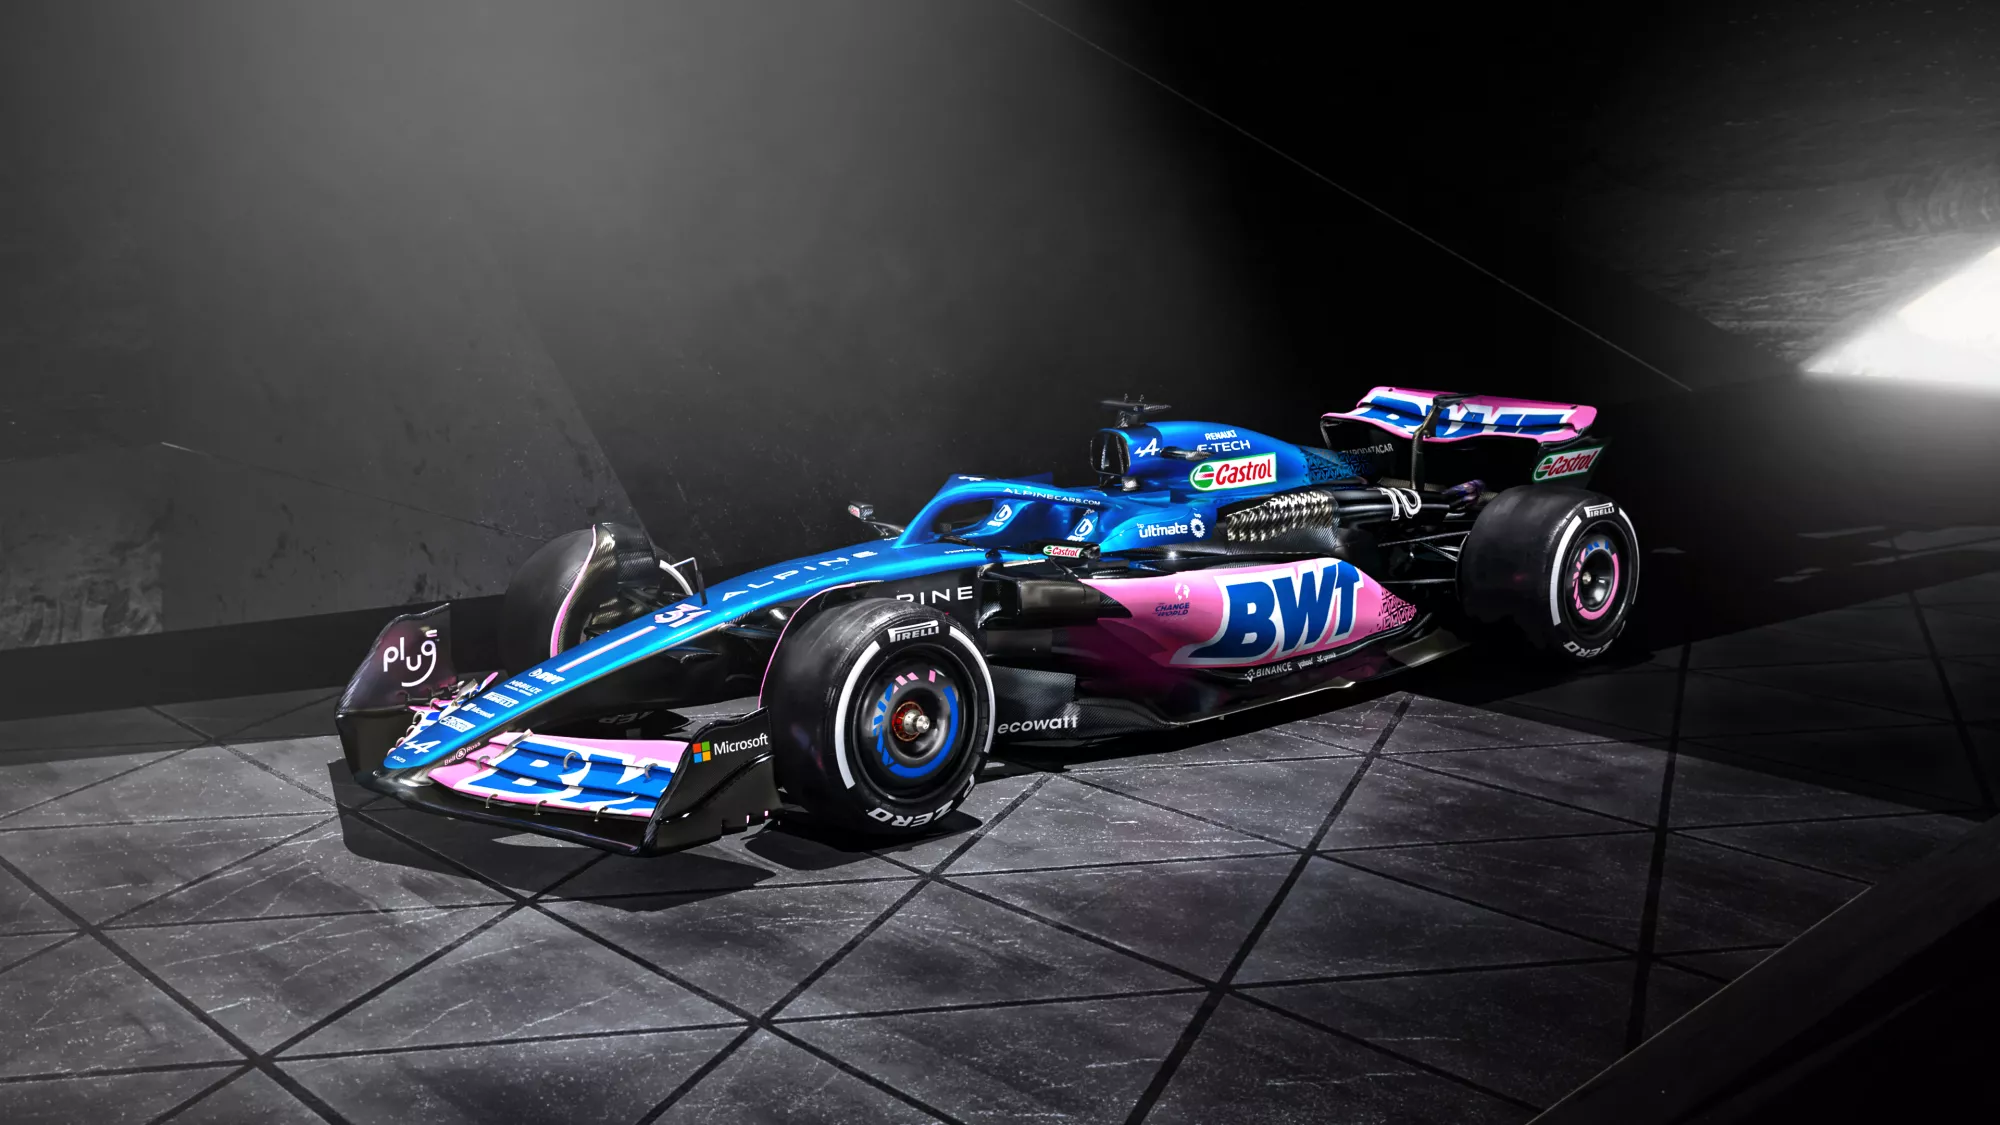 BWT Alpine F1 Team gears up for 2023 Formula 1 season by unveiling